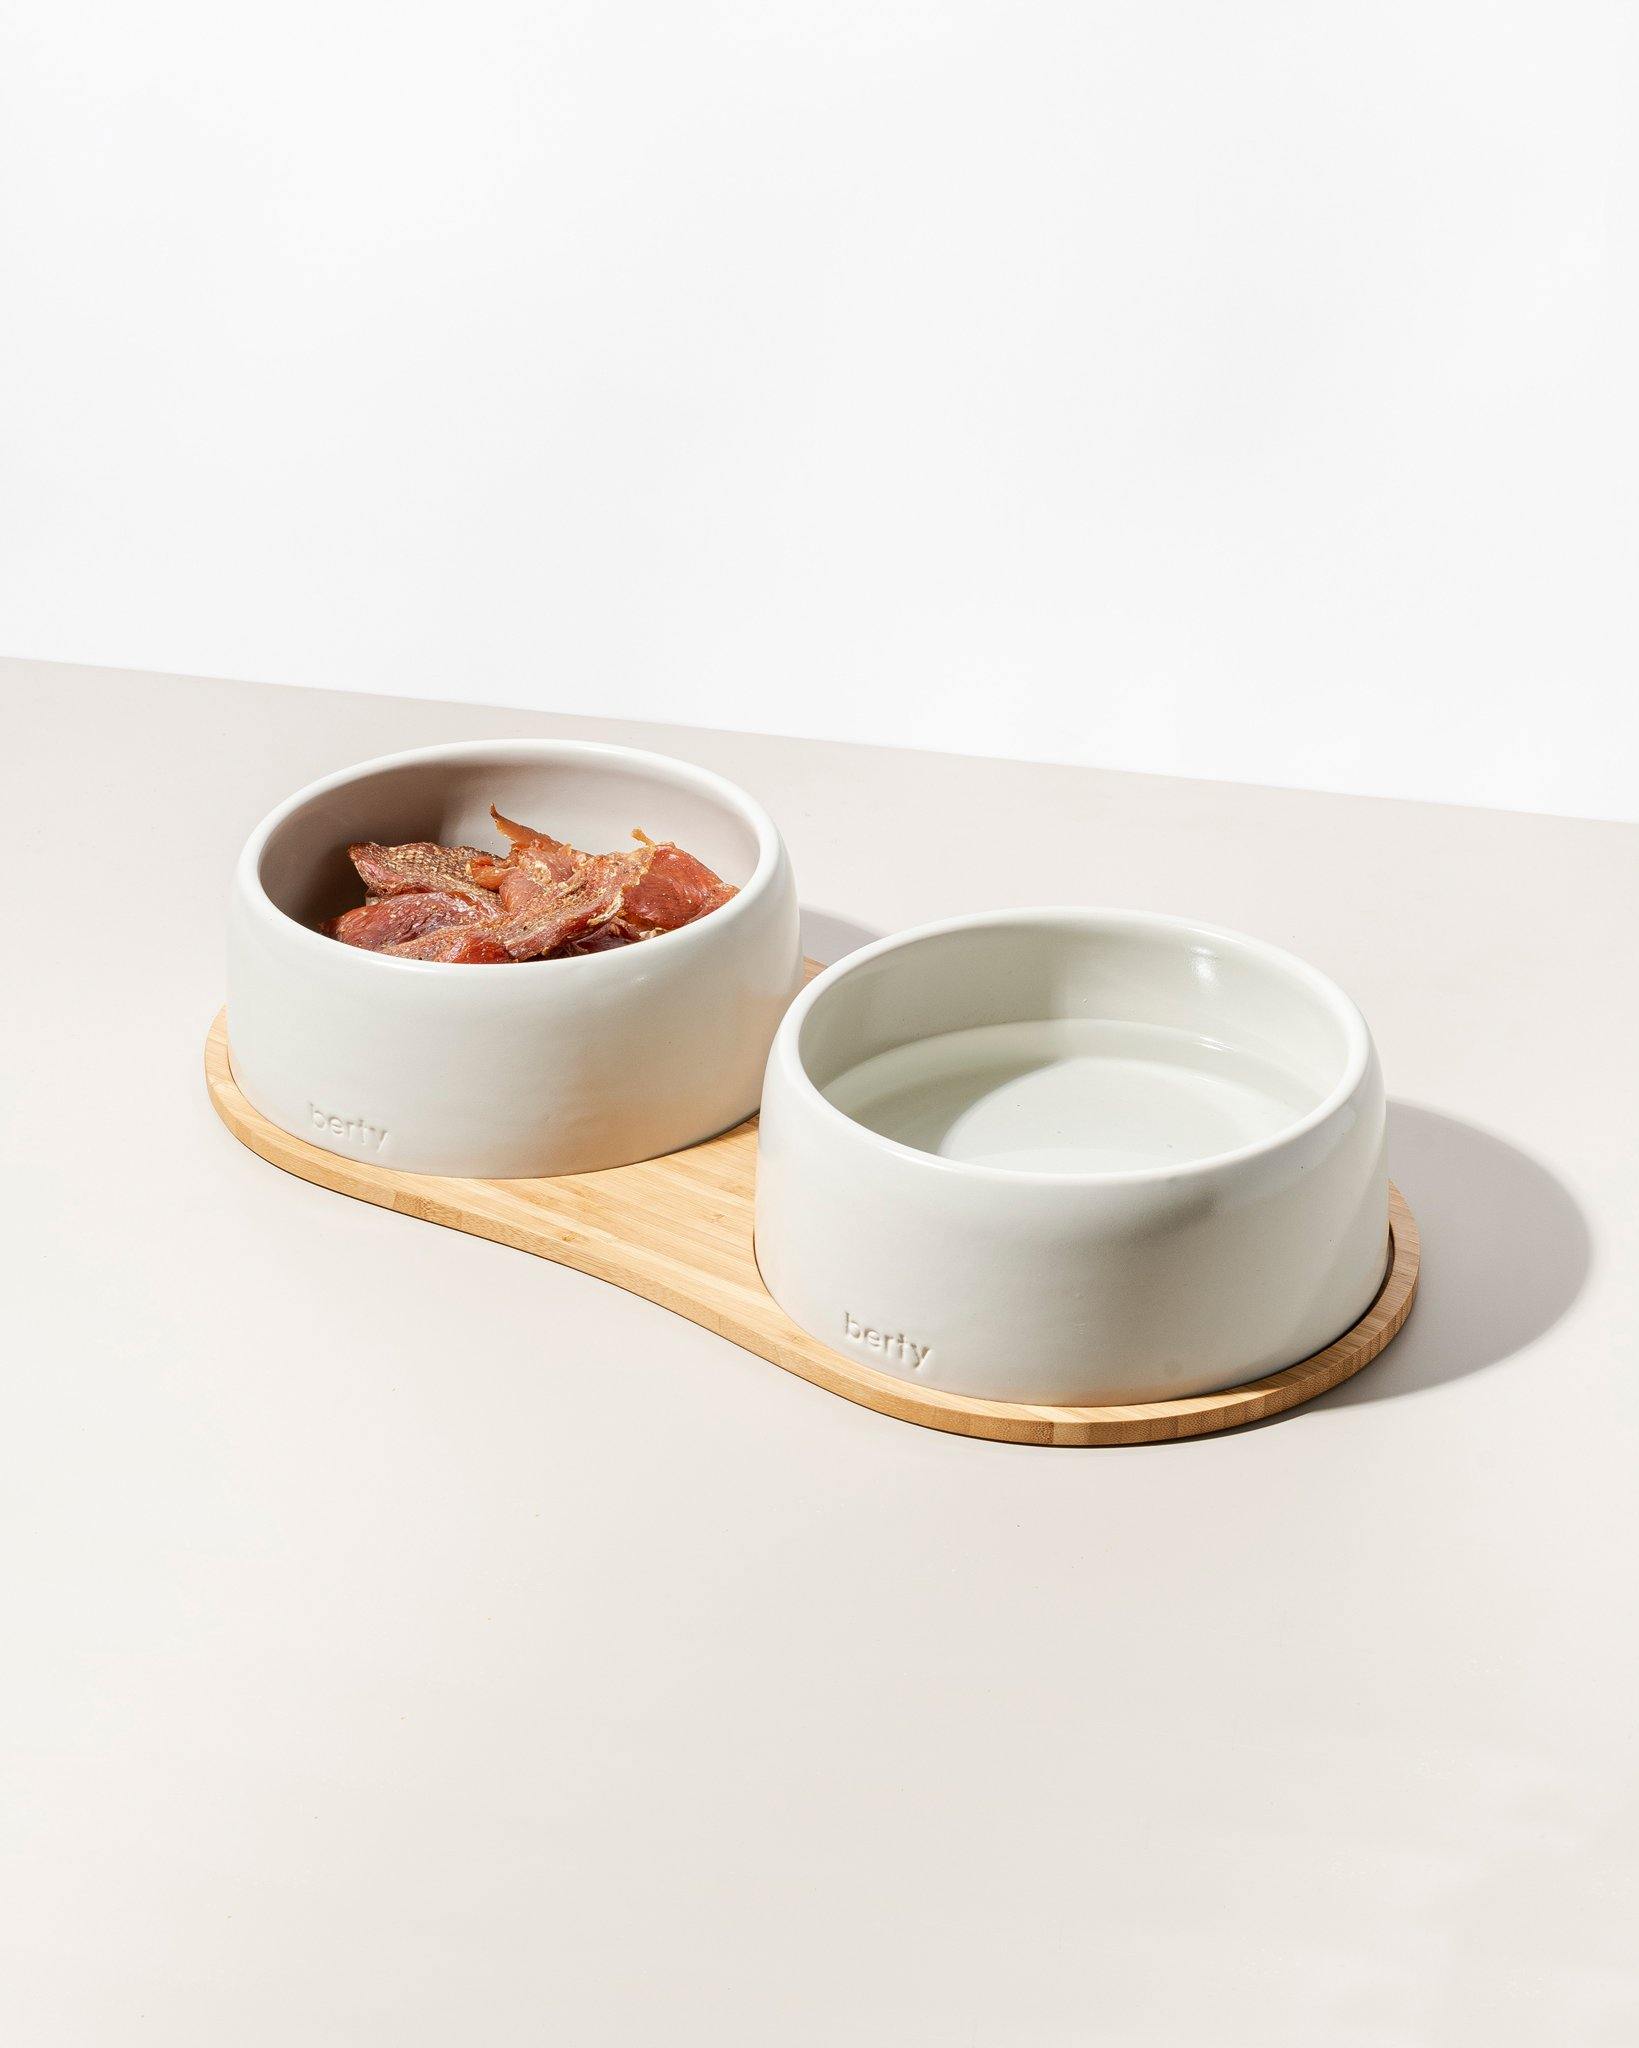 the dining set - bowls & tray set | oyster - berty